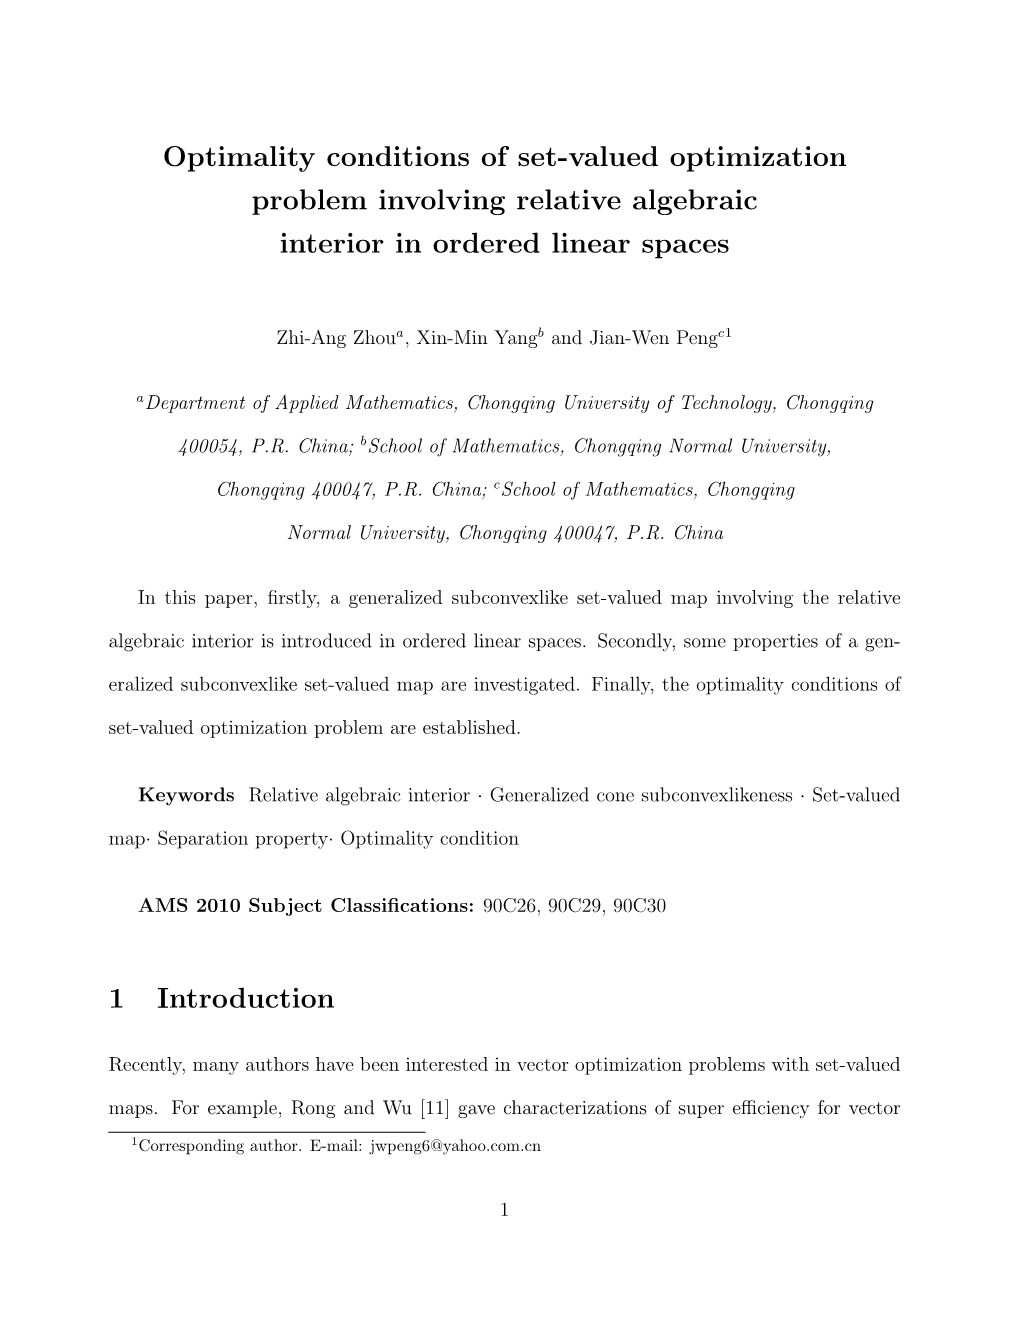 Optimality Conditions of Set-Valued Optimization Problem Involving Relative Algebraic Interior in Ordered Linear Spaces